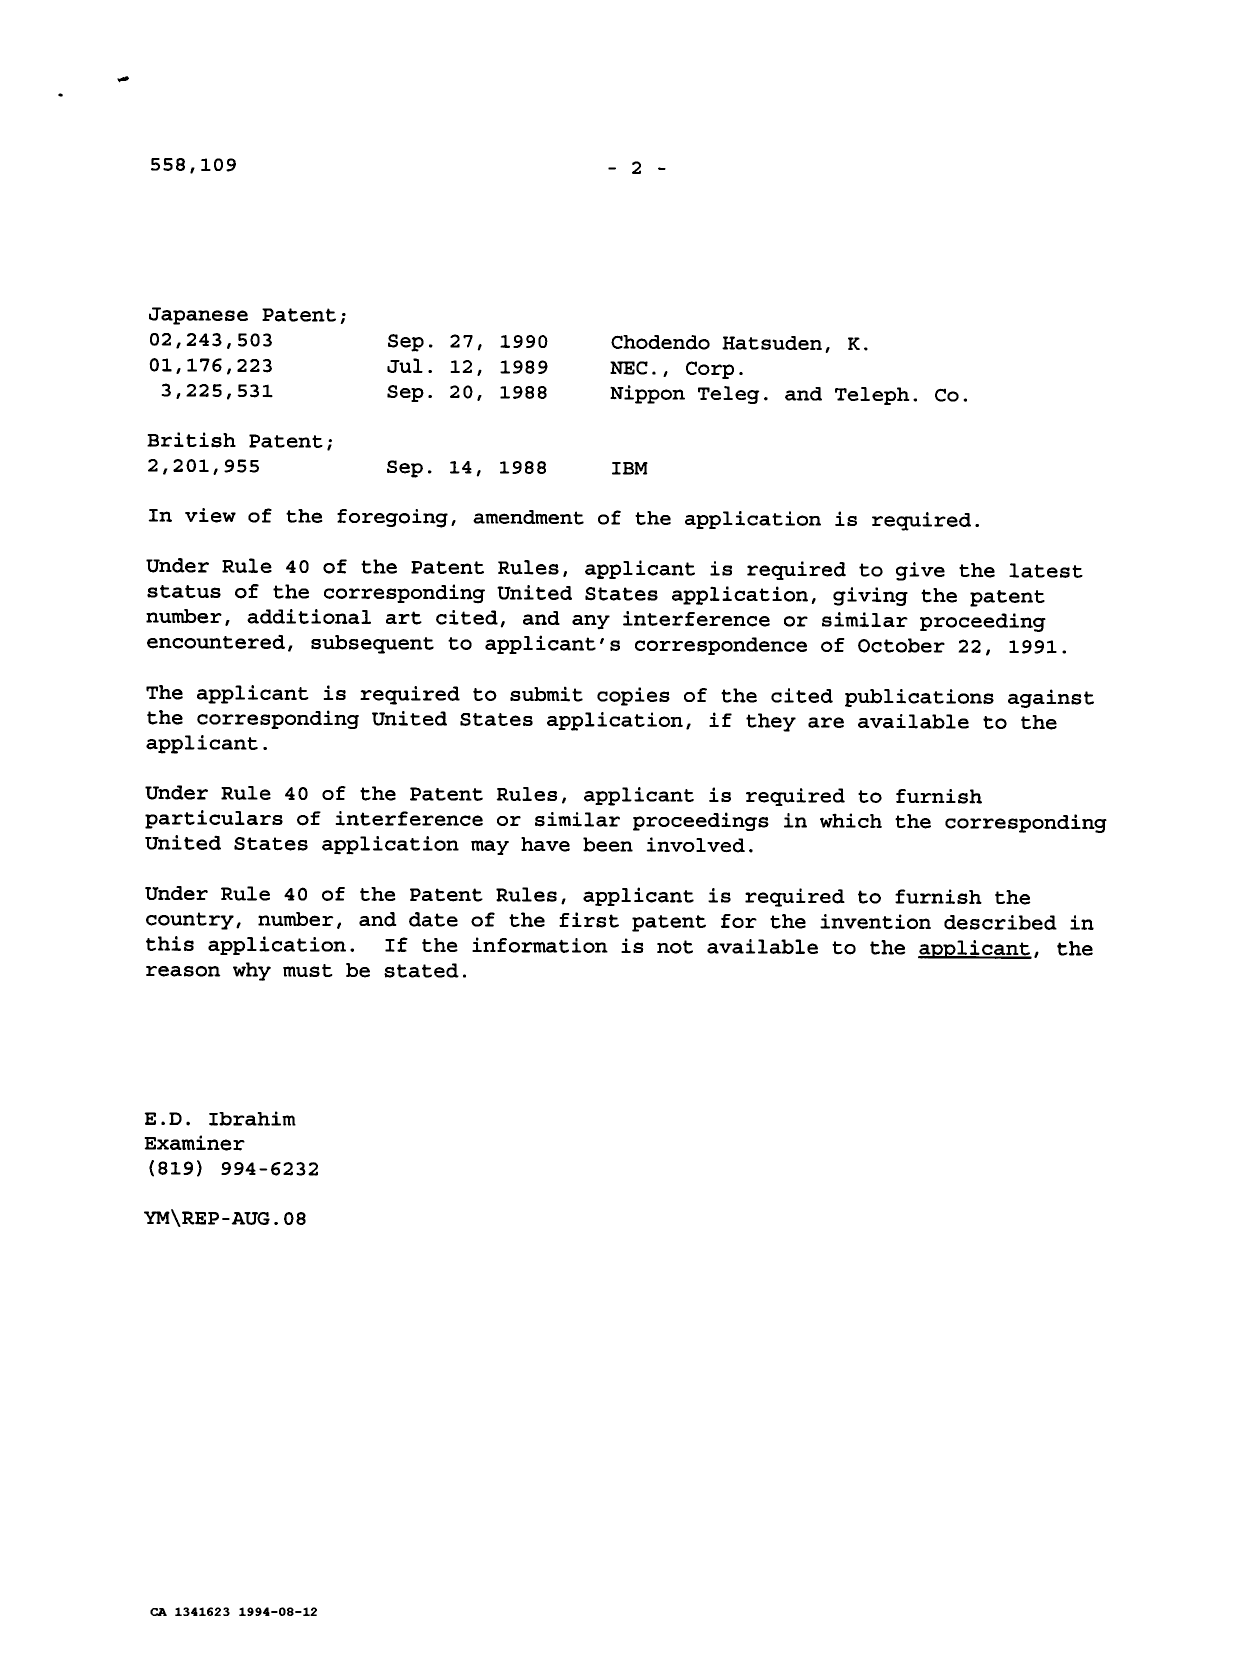 Canadian Patent Document 1341623. Examiner Requisition 19940812. Image 2 of 2